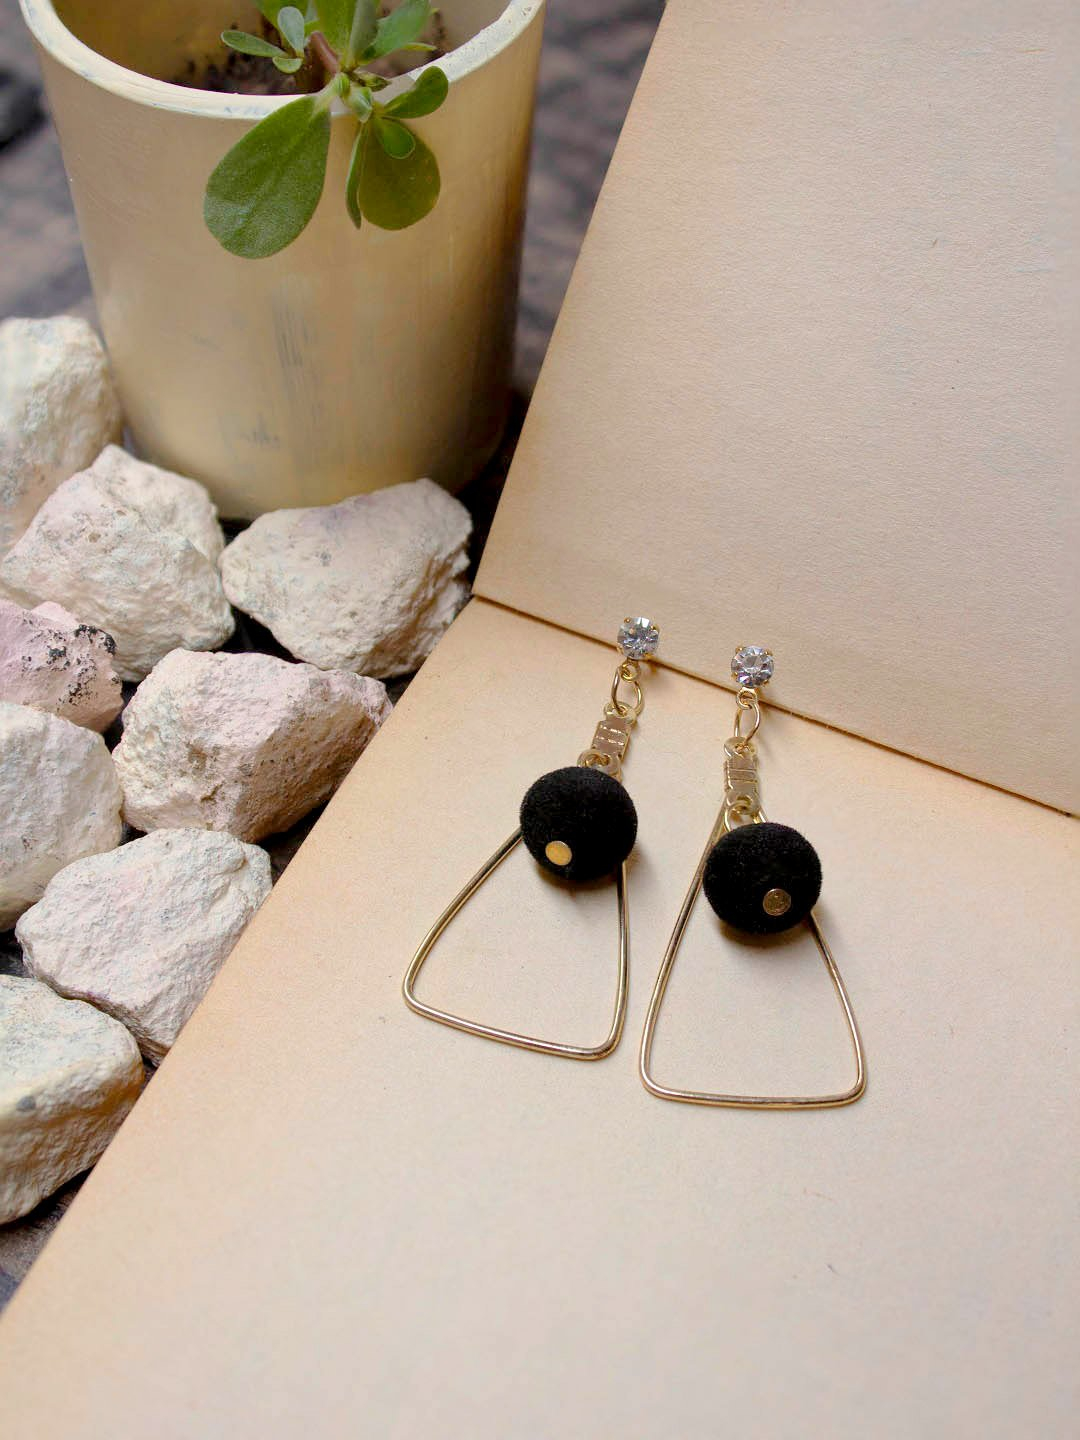 Hillberg & Berk - The Sparkle Ball™ Statement Earrings pair perfectly with  a little black dress or a bold blazer for a chic look worthy of  celebration.✨ | Facebook